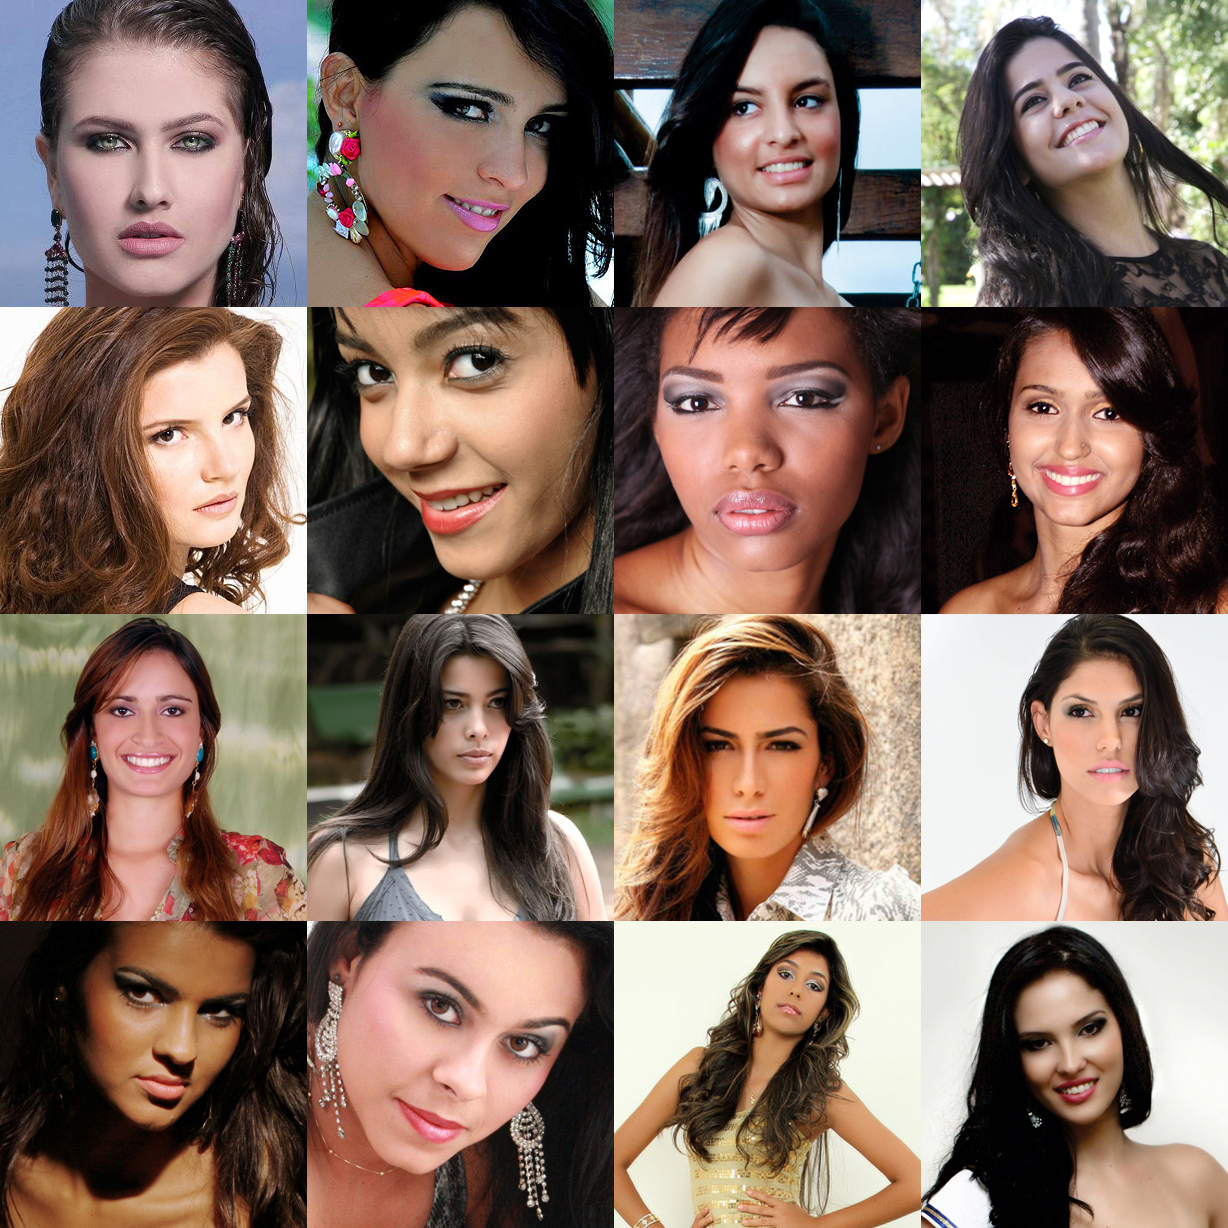 Meet the 16 official candidates for the title of Miss Goias 2012!